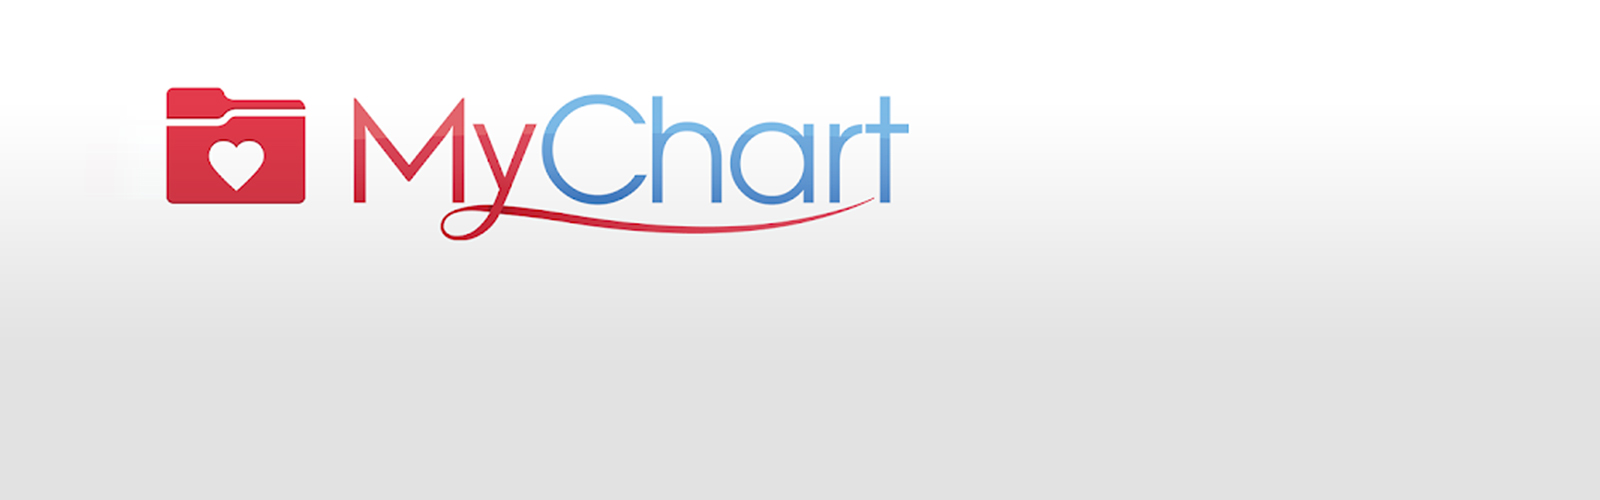 Mychart Minute Clinic Covid Test Results